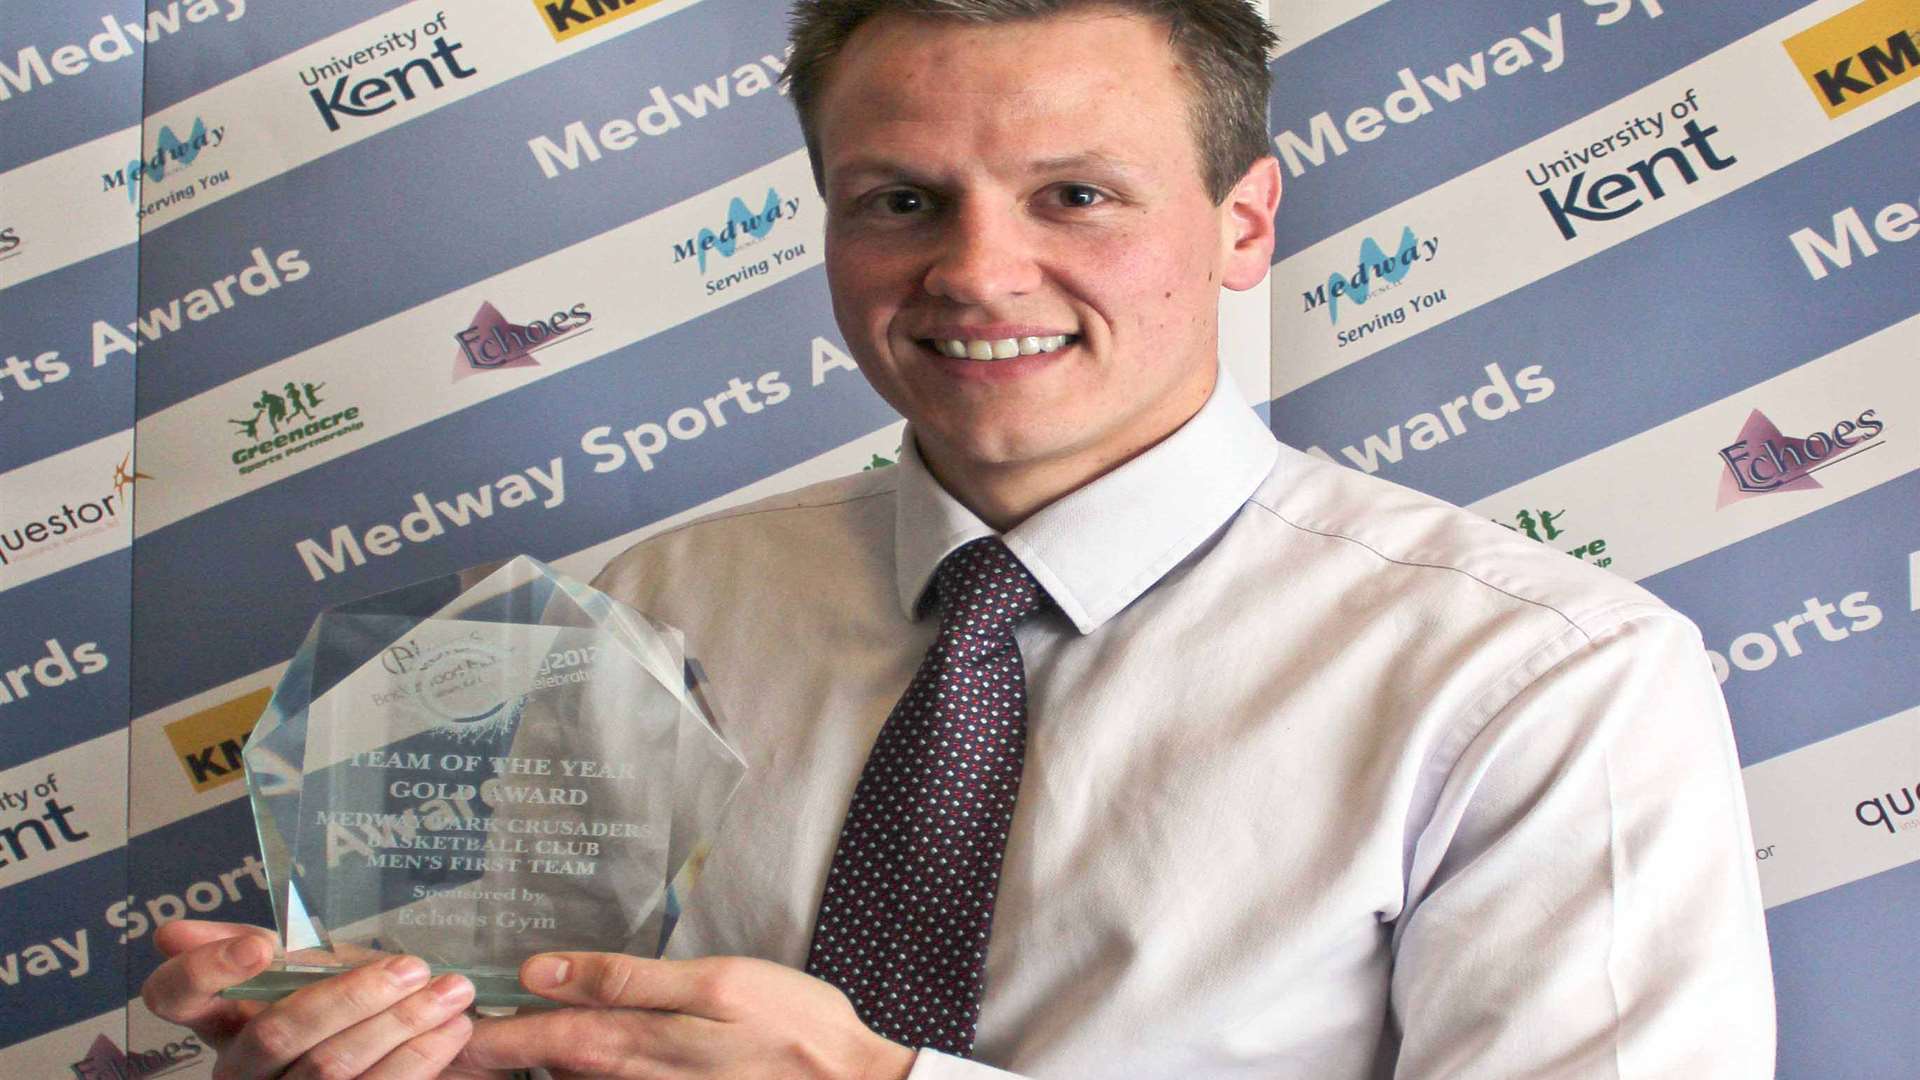 Medway Park Crusaders won Team of the Year at the 2012 Medway Sports Awards